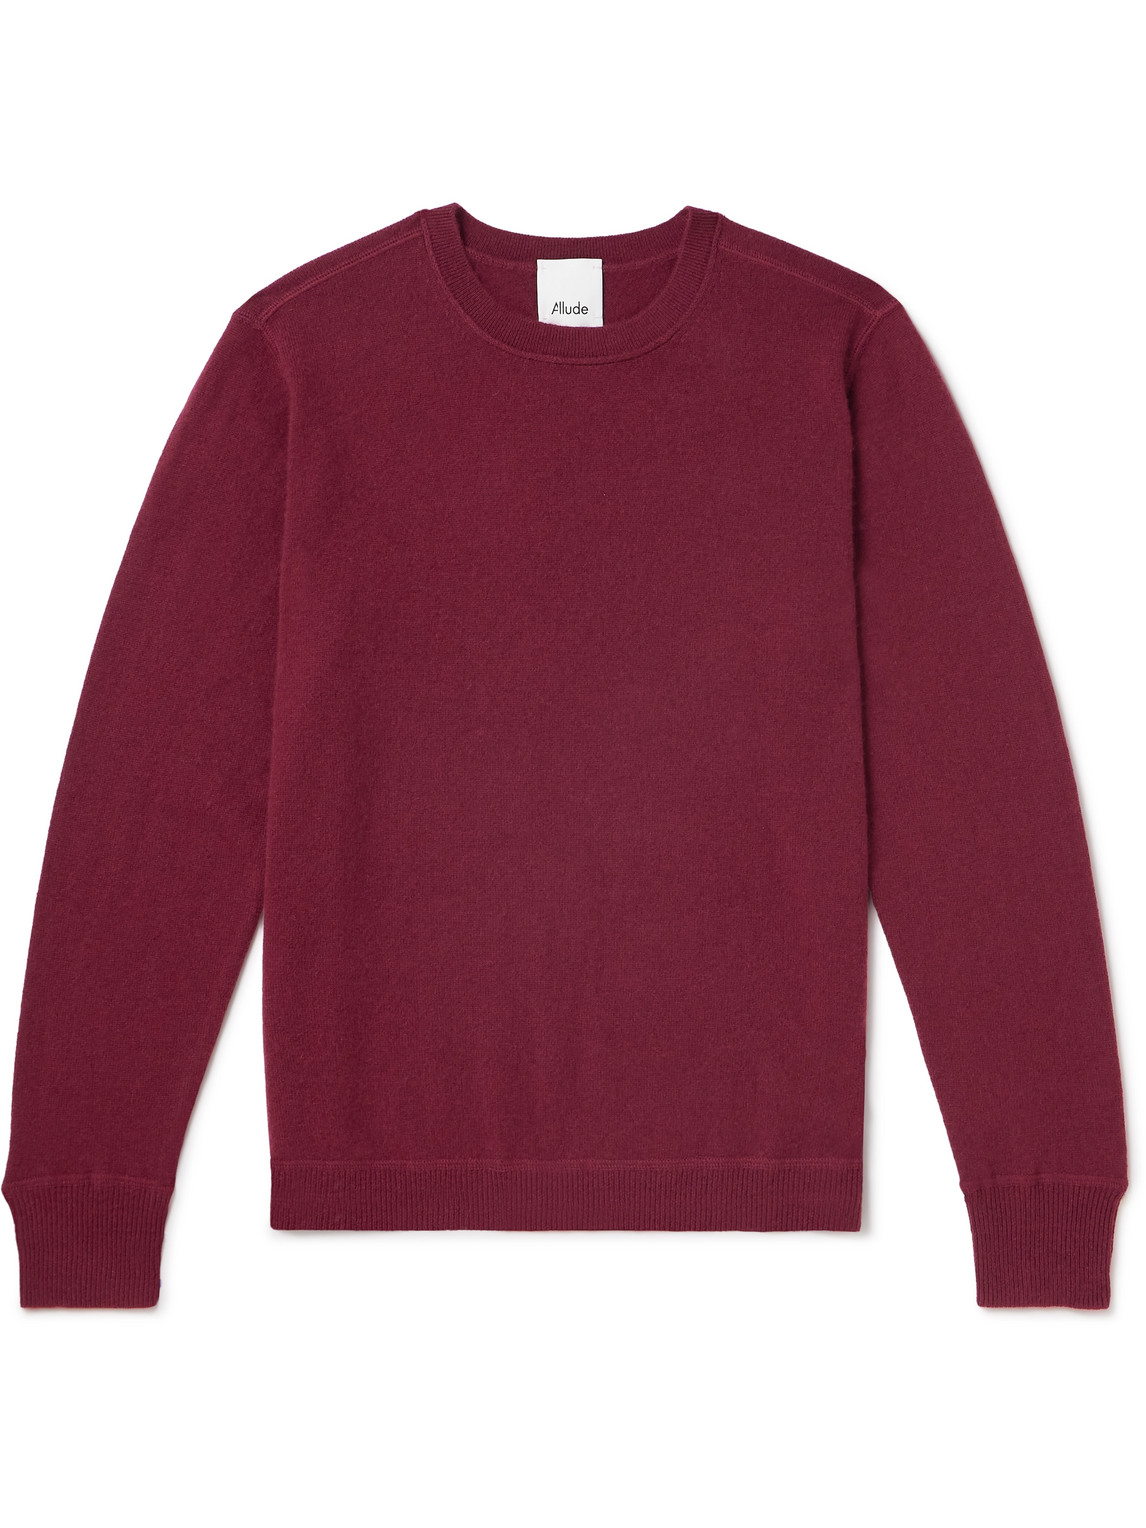 Allude Cashmere Sweater In Burgundy